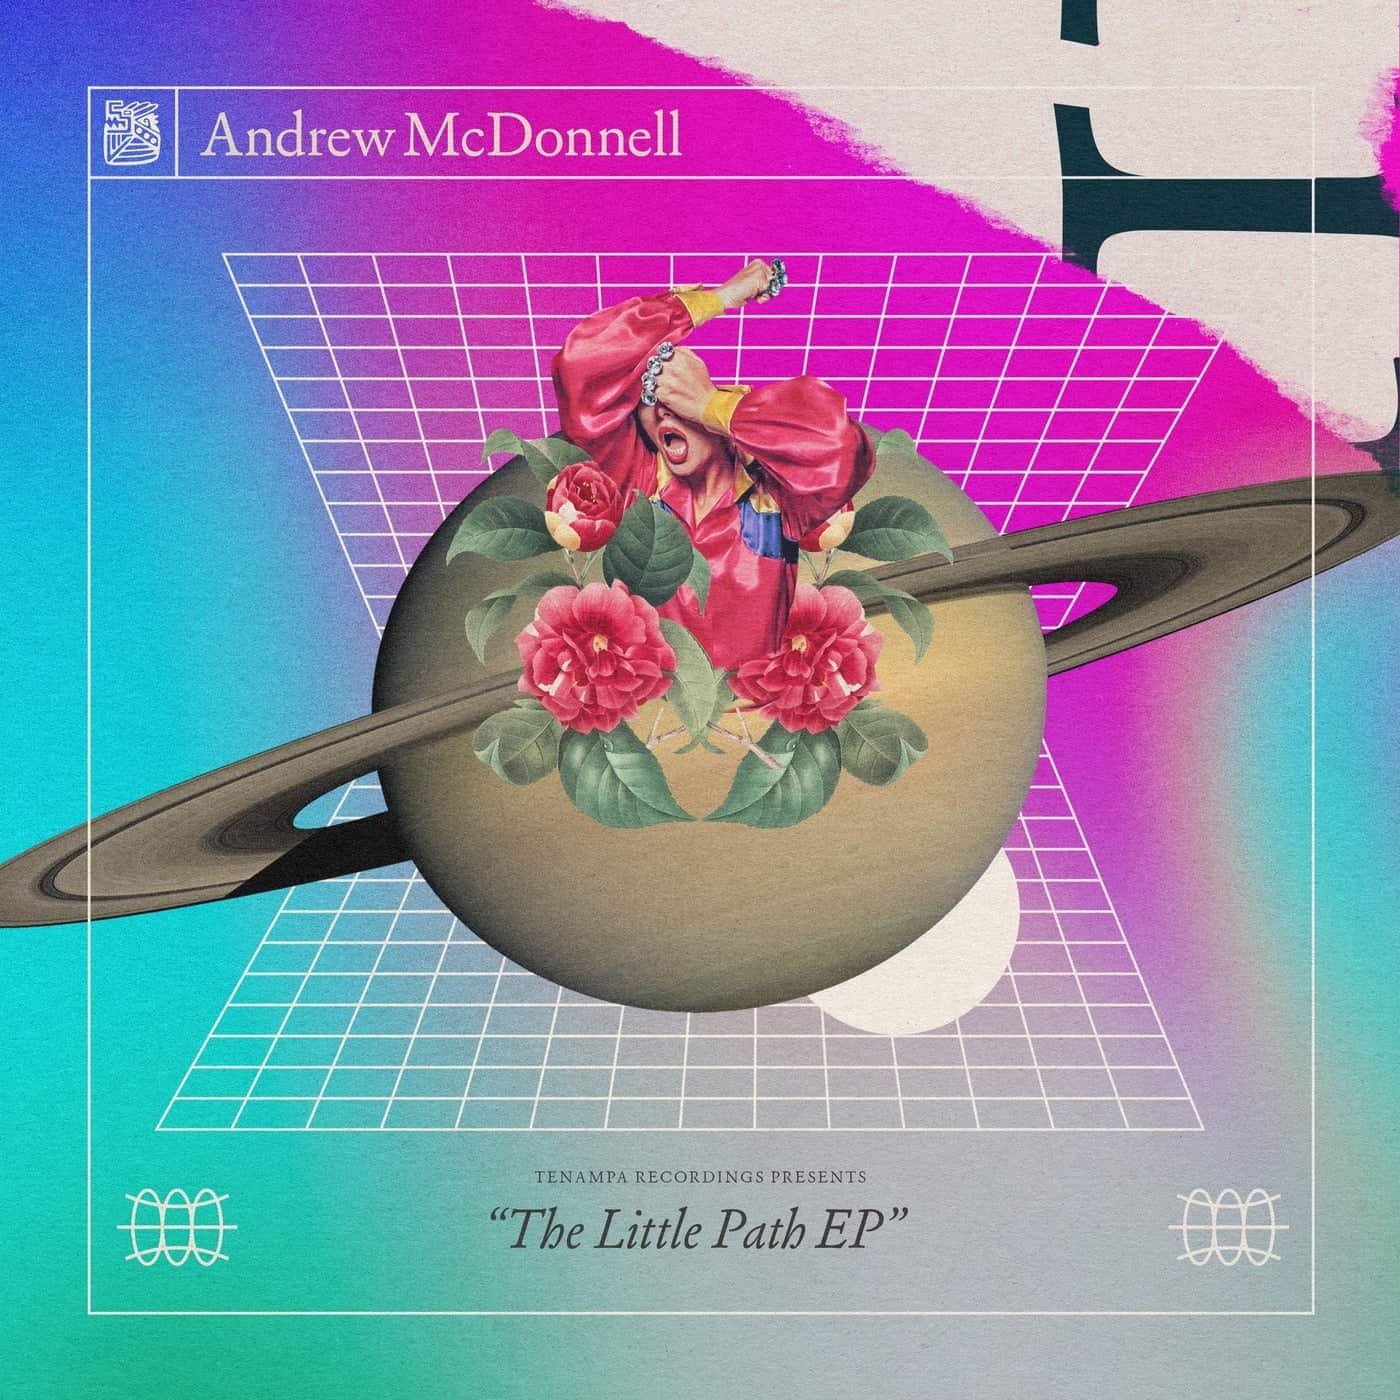 Download Andrew McDonnell - The Little Path EP on Electrobuzz